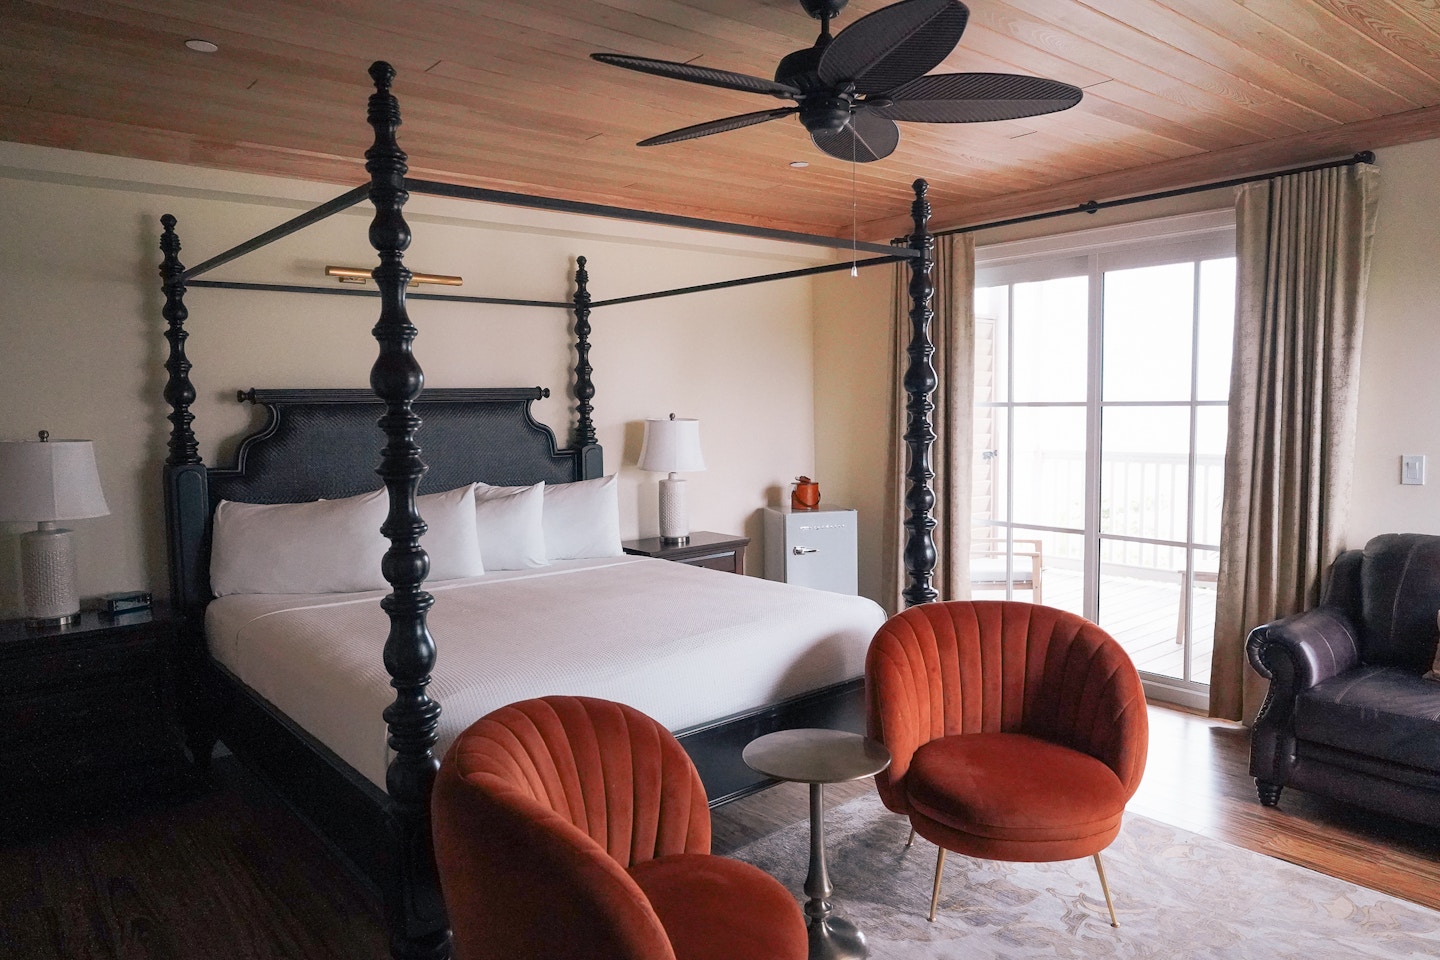 The Galleon Suite in the Wreckers House at Grassy Flats Resort and Beach Club was spacious and lovely! A great King-size canopy bed, cast iron tub, double vanity and walk-in shower were highlights, along with the Ocean View balcony!